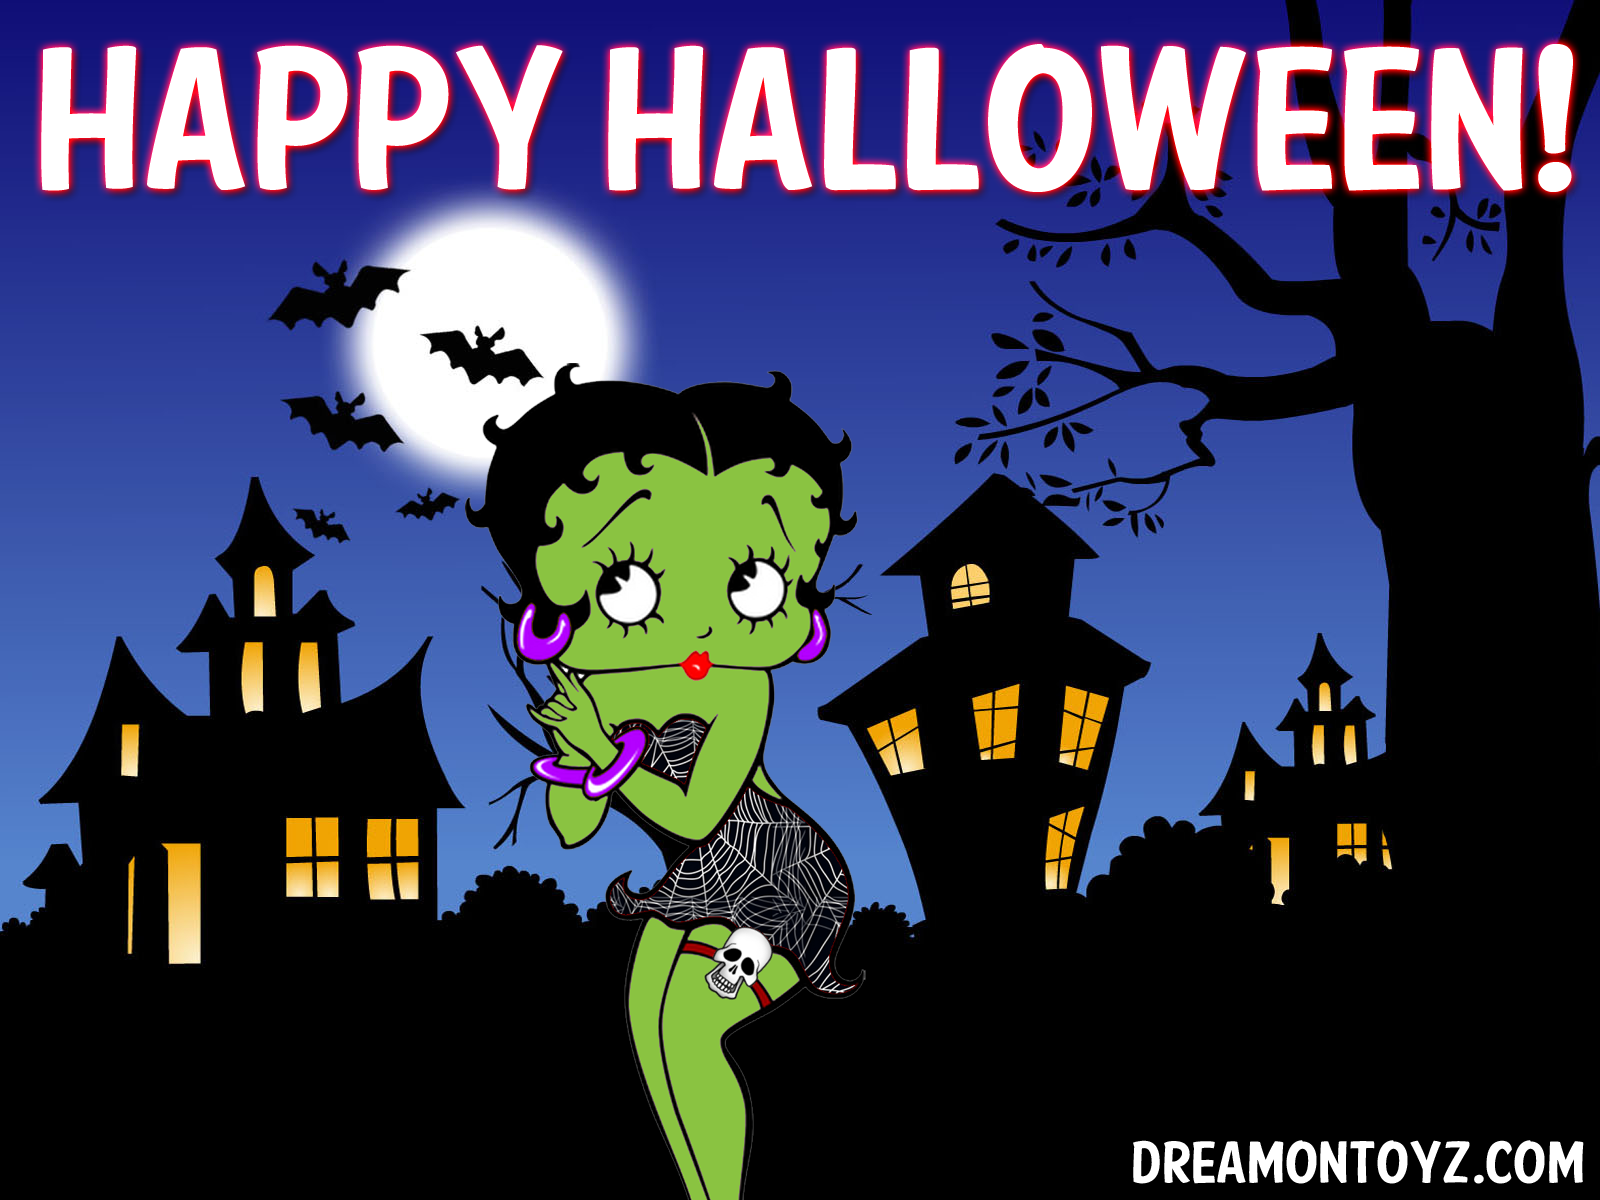 Betty Boop Pictures Archive - BBPA: Betty Boop Halloween wallpapers